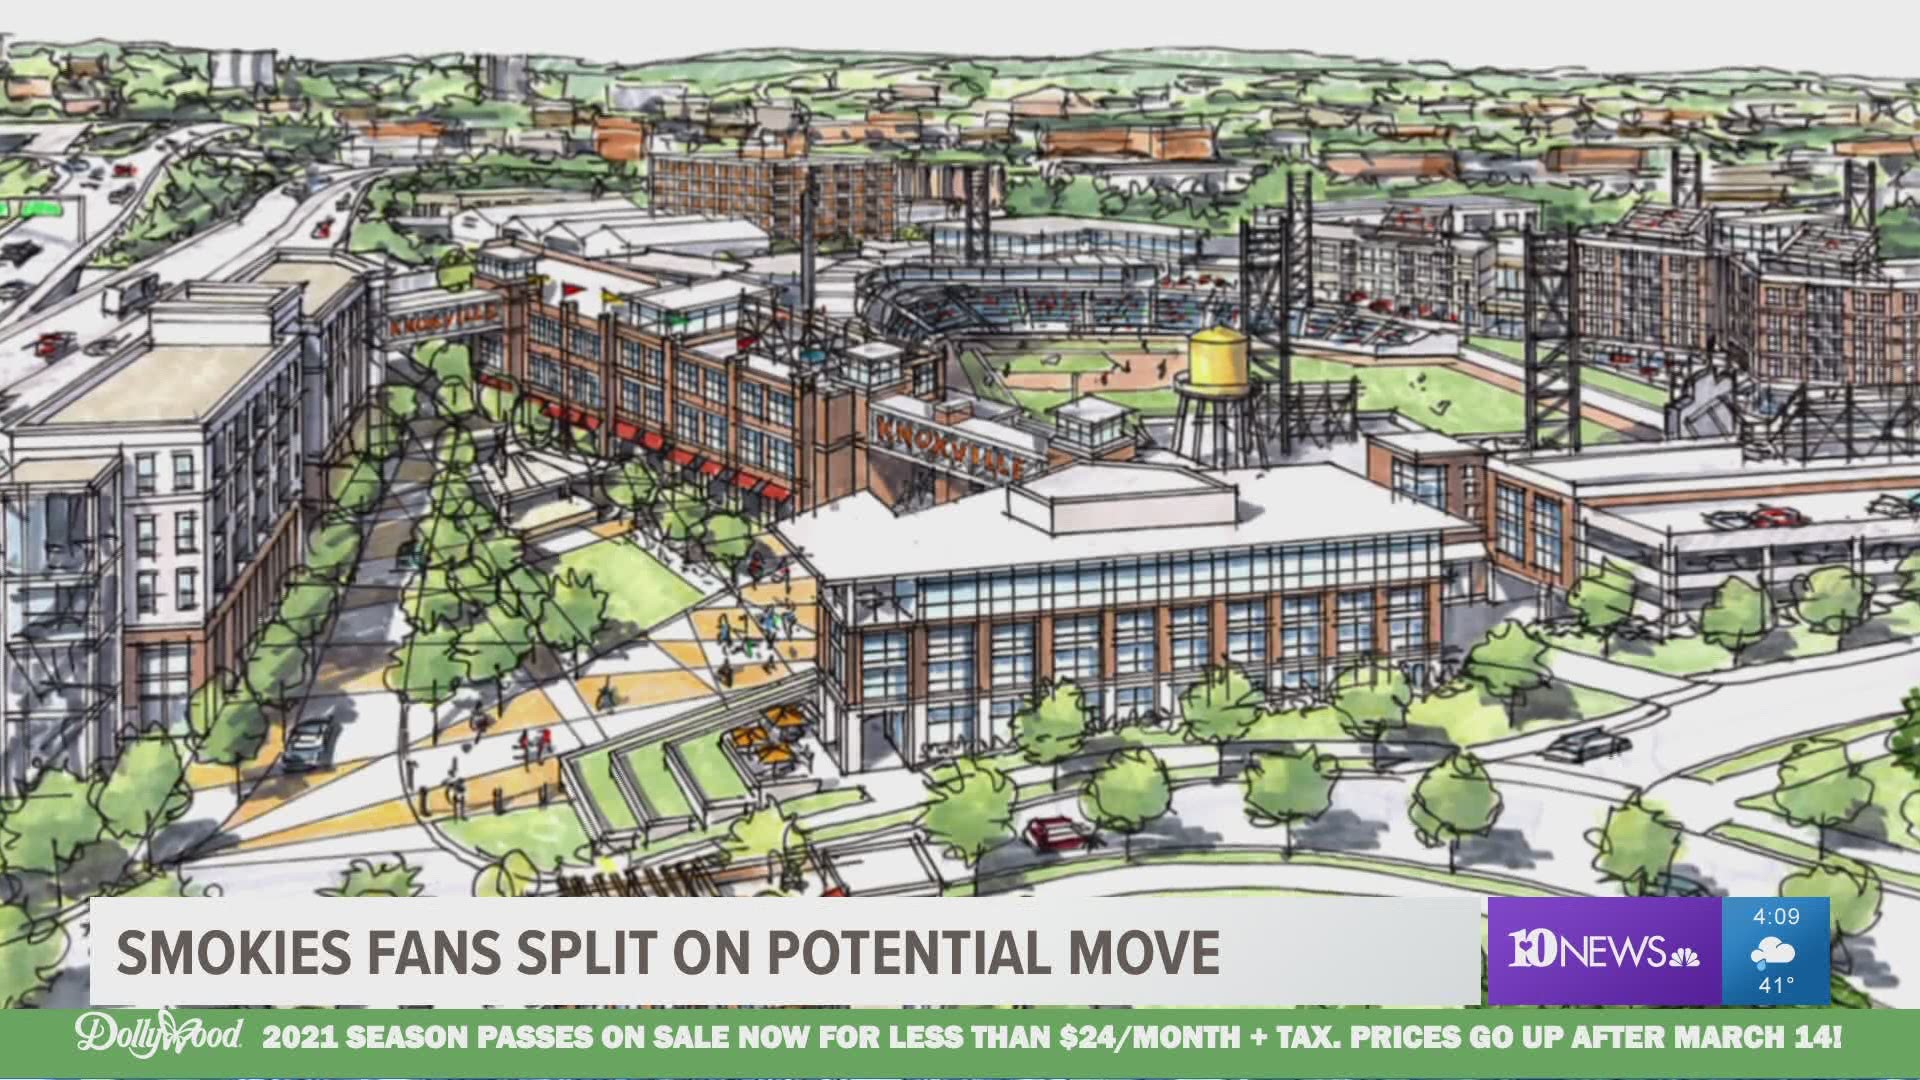 As we continue coverage on the development of a new stadium in Knoxville, Smokies fans are split on the team's potential move downtown.